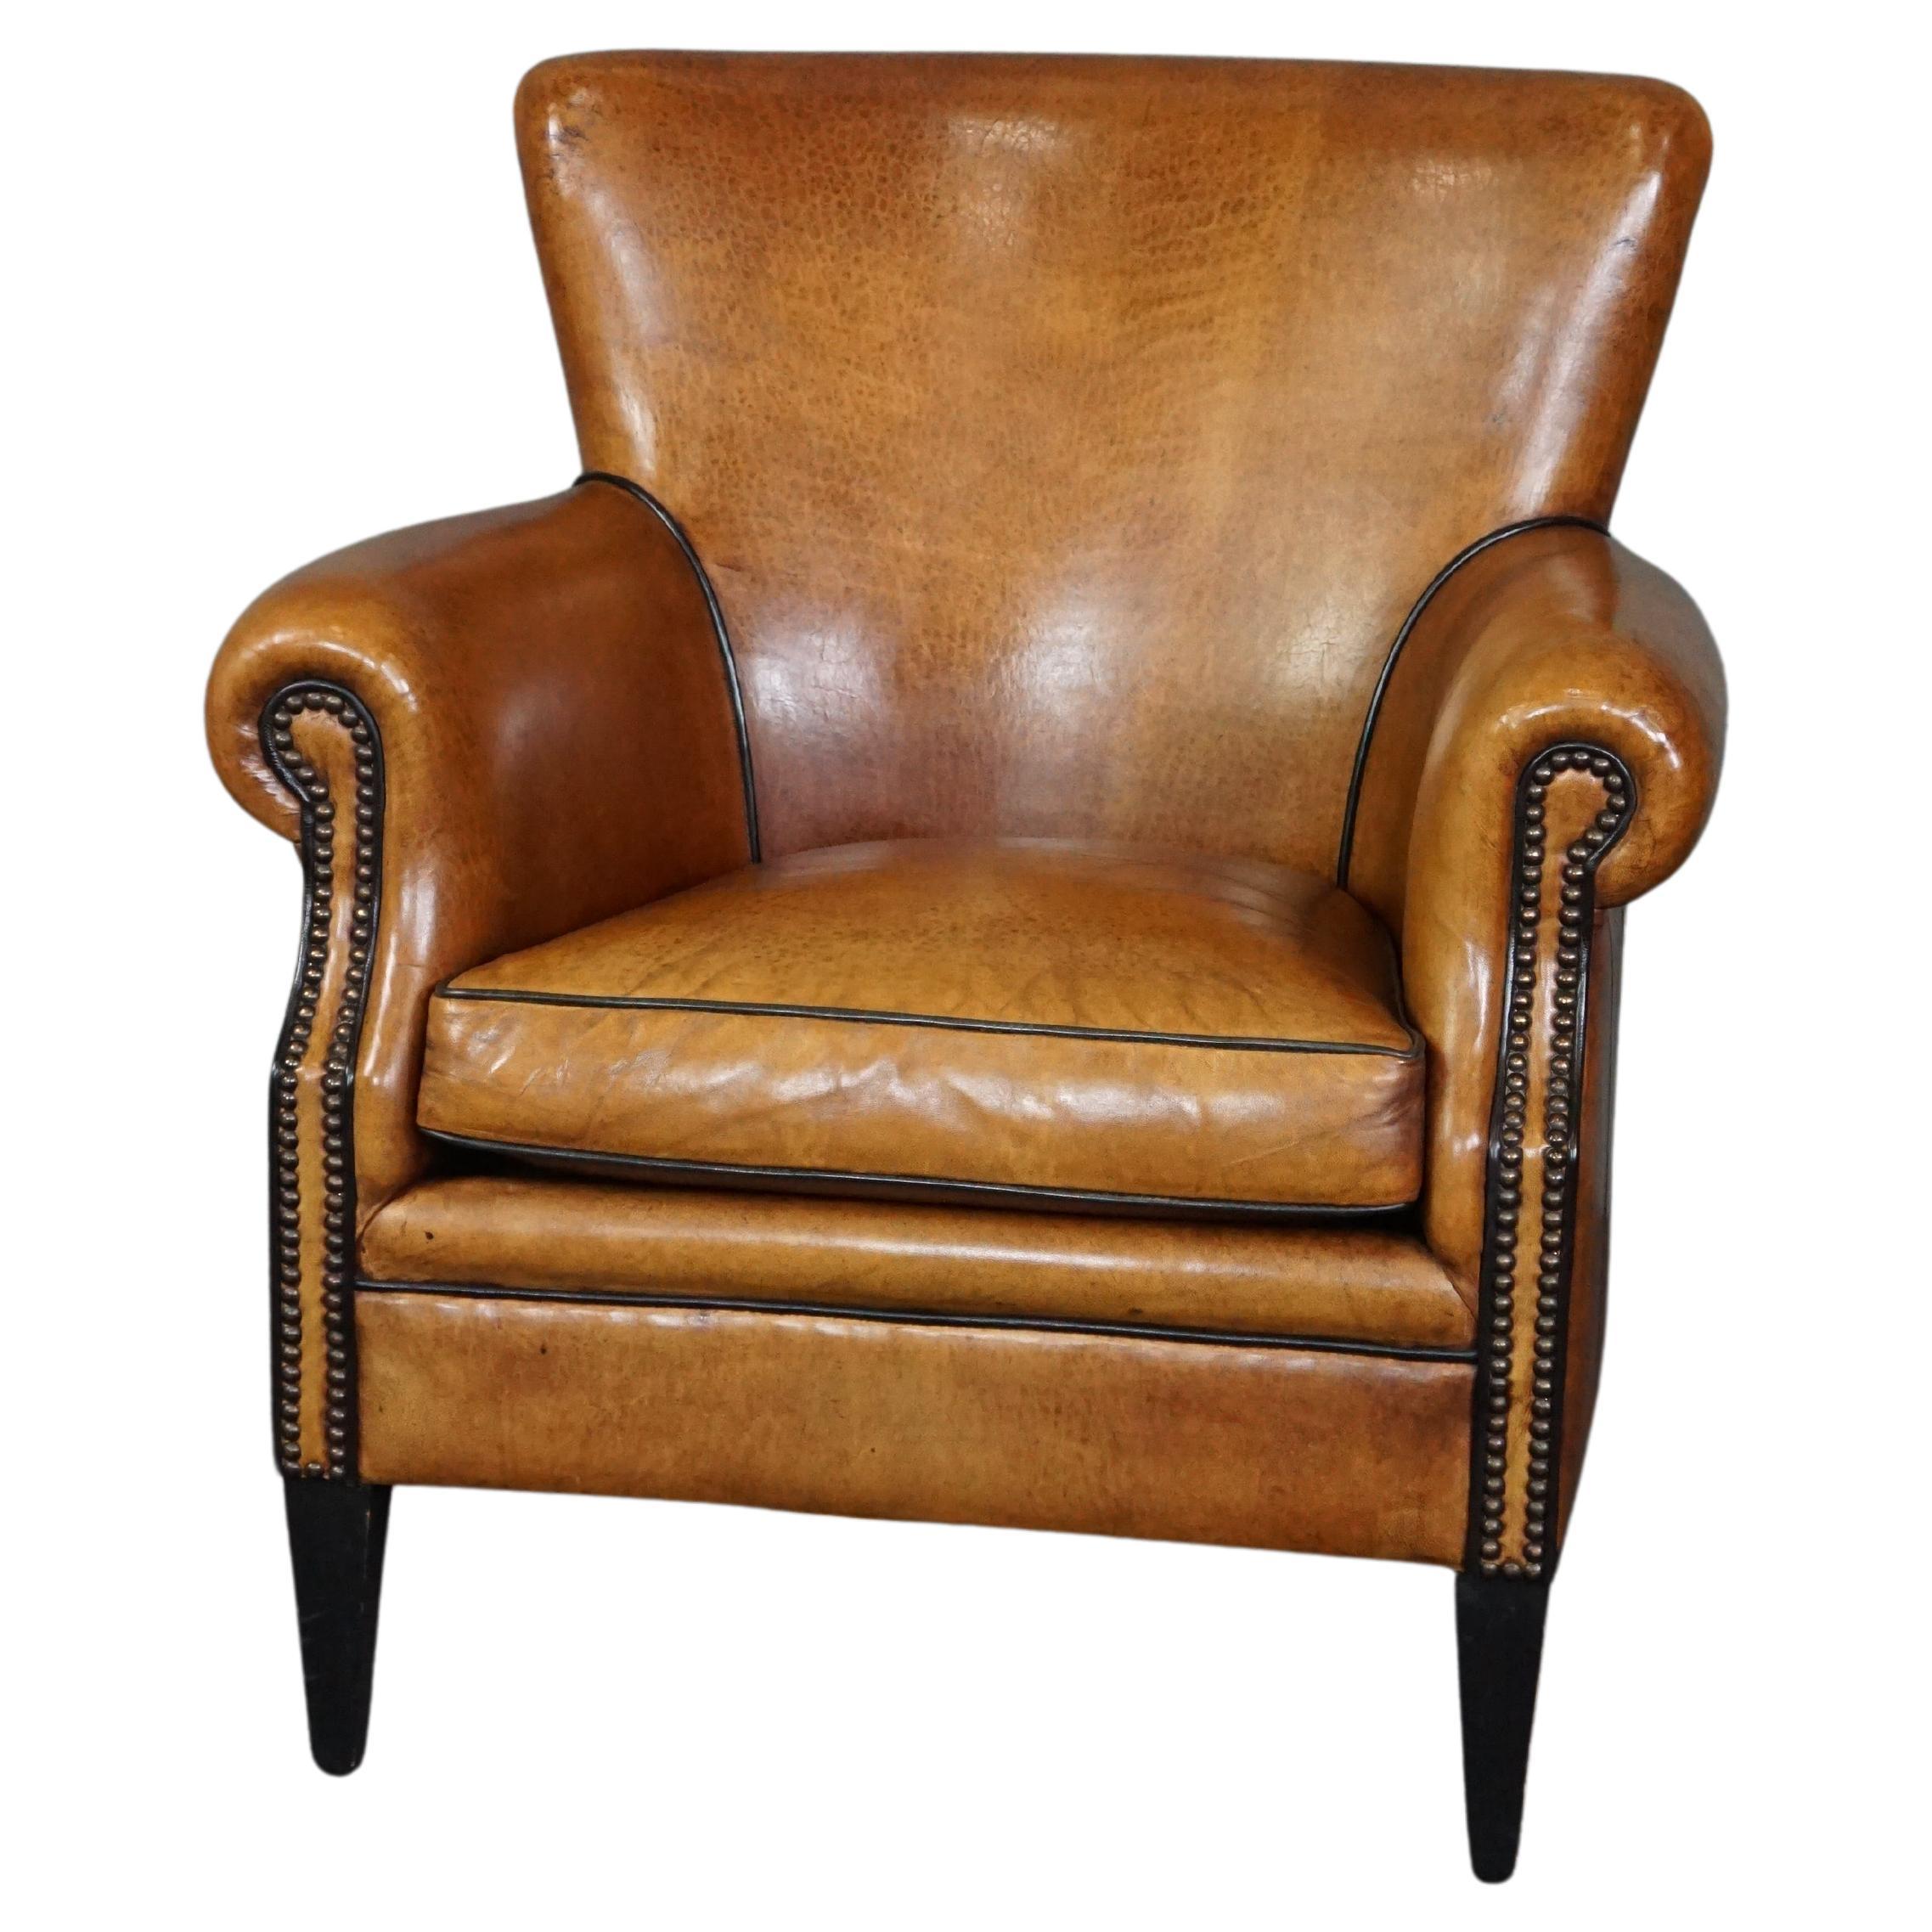 Very beautifully colored sheep leather armchair, Lounge Atelier For Sale